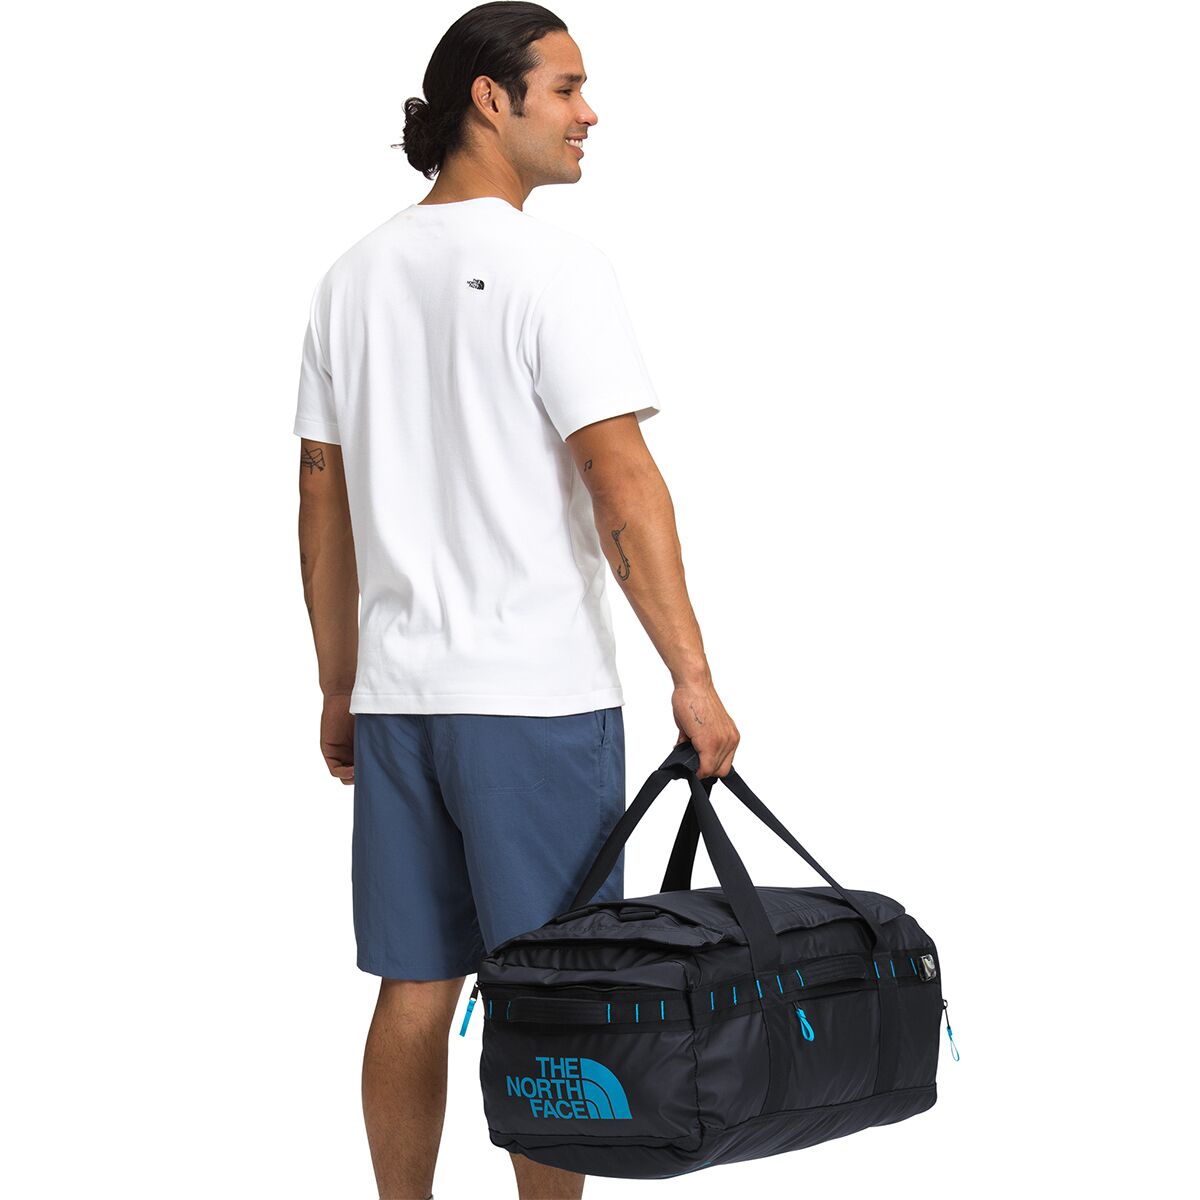 The North Face Base Camp Voyager 62L Duffel Bag - Travel